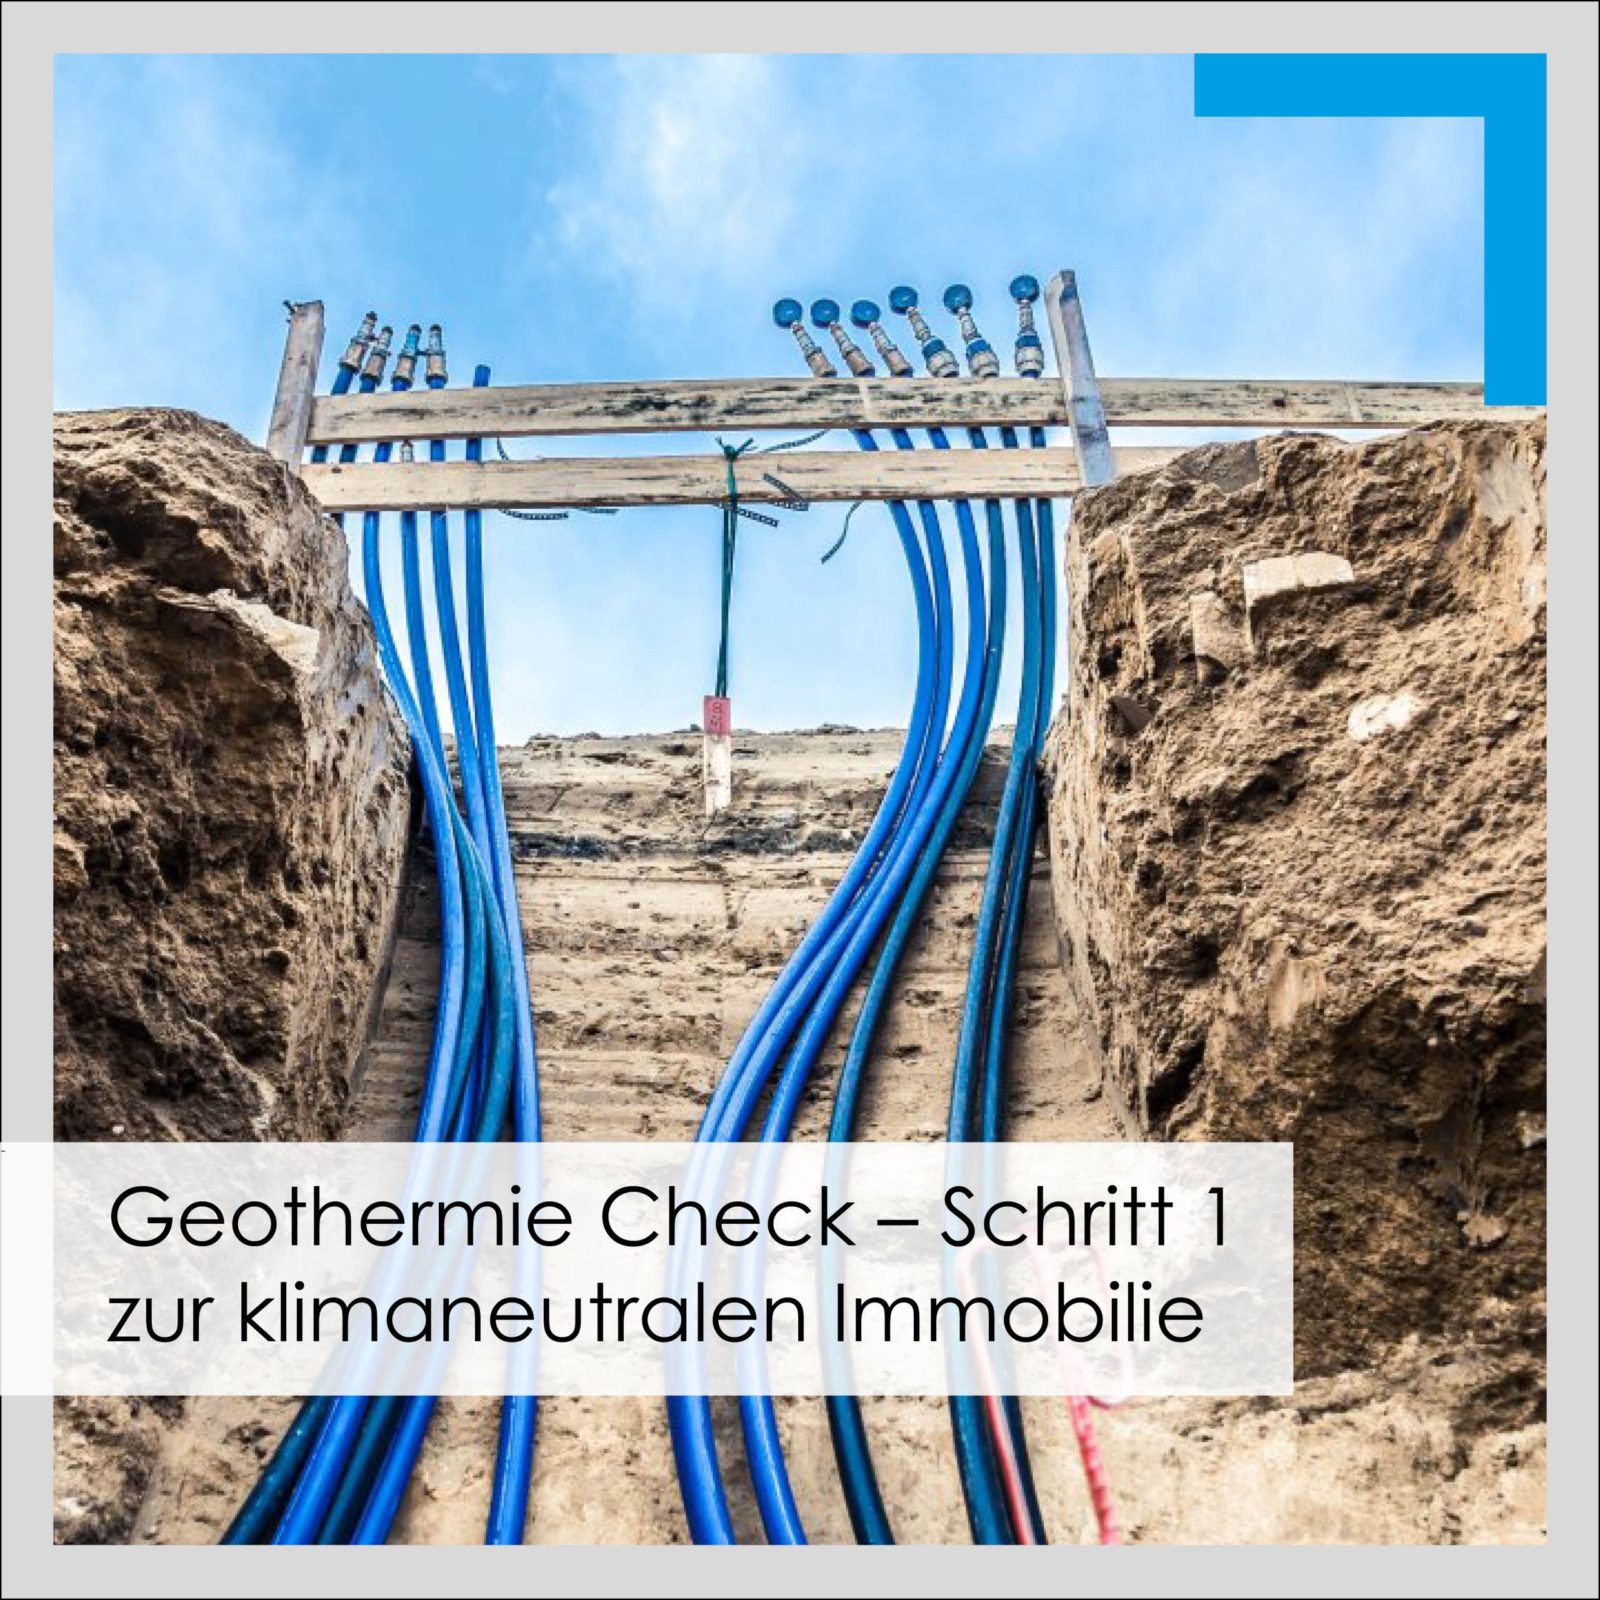 MuP Geothermie Check Klimaneutrale Immobilie scaled 1